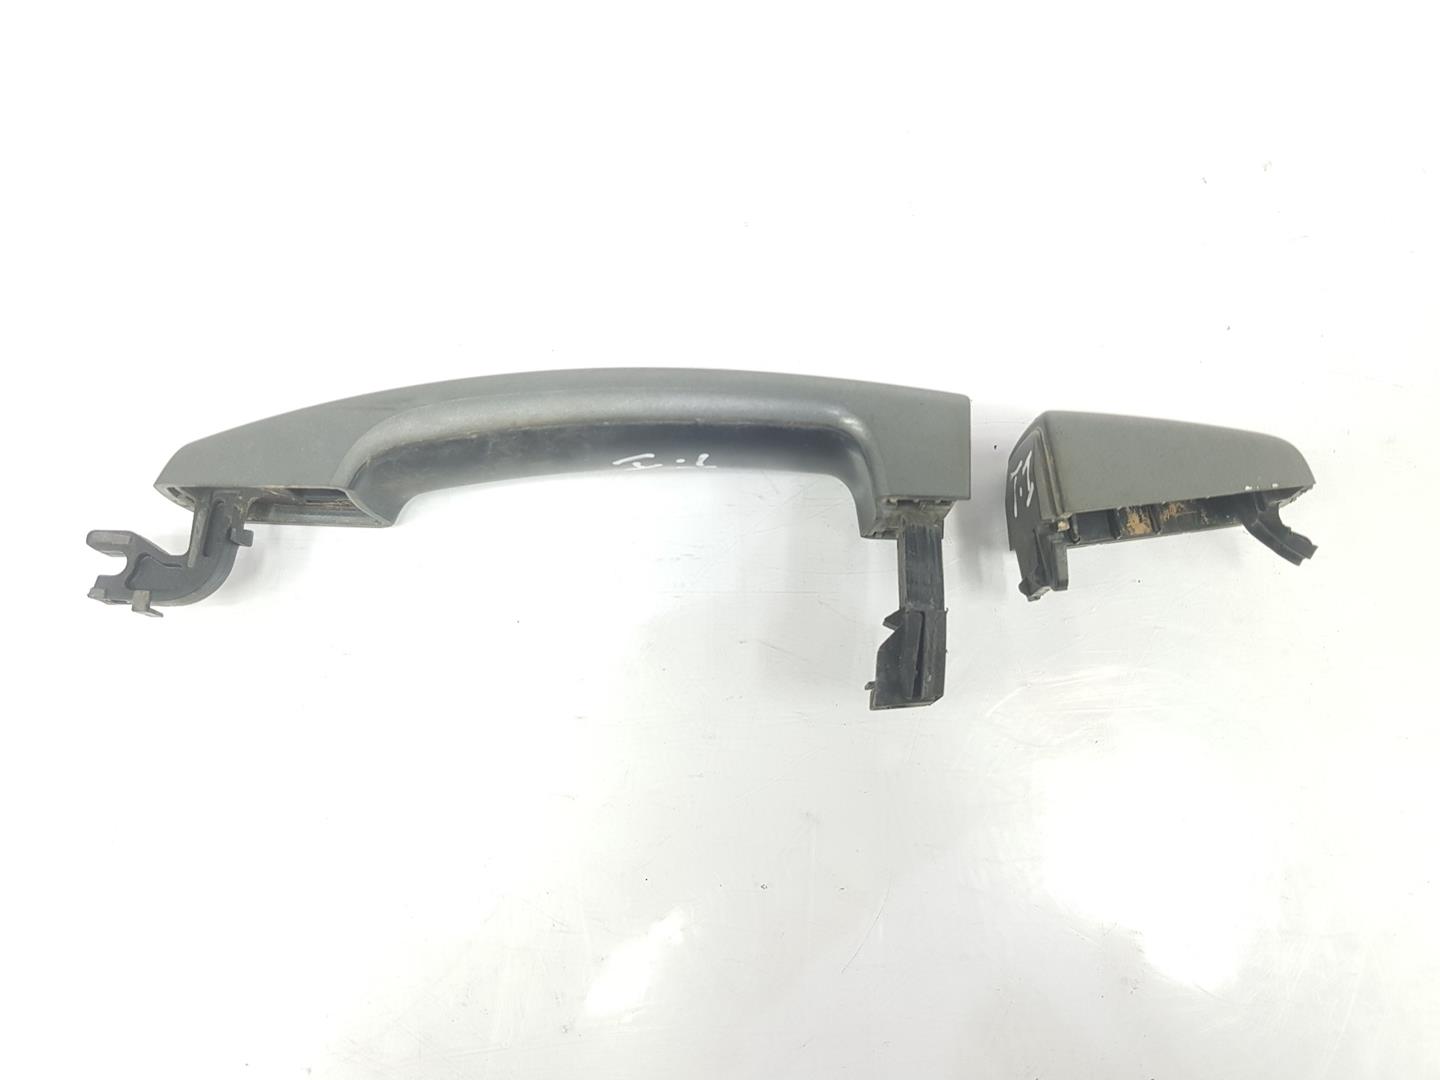 LAND ROVER Discovery 4 generation (2009-2016) Rear Left Door Exterior Handle LR020928, AH2222404BC8LAE, COLORBRONCE 24130979